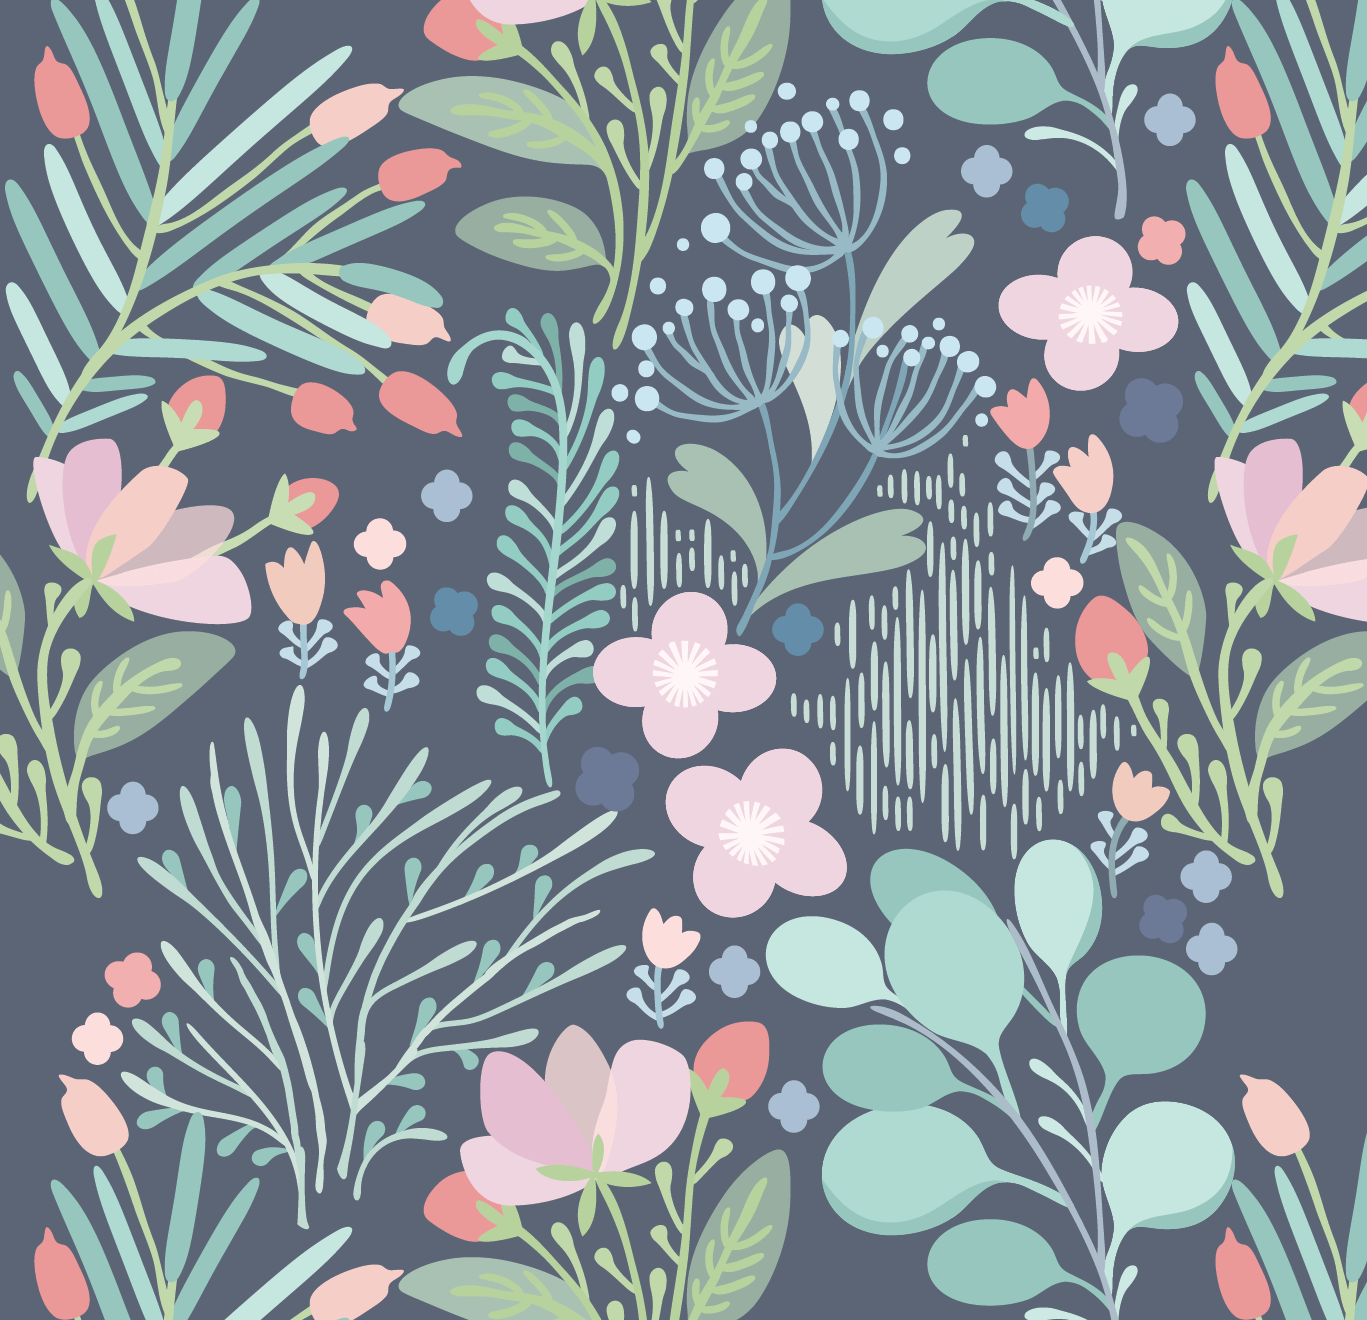 Pattern of blue floral wallpaper with a variety of pastel-colored flowers and leaves, including pink, light blue, and mint green, set against a dark blue background